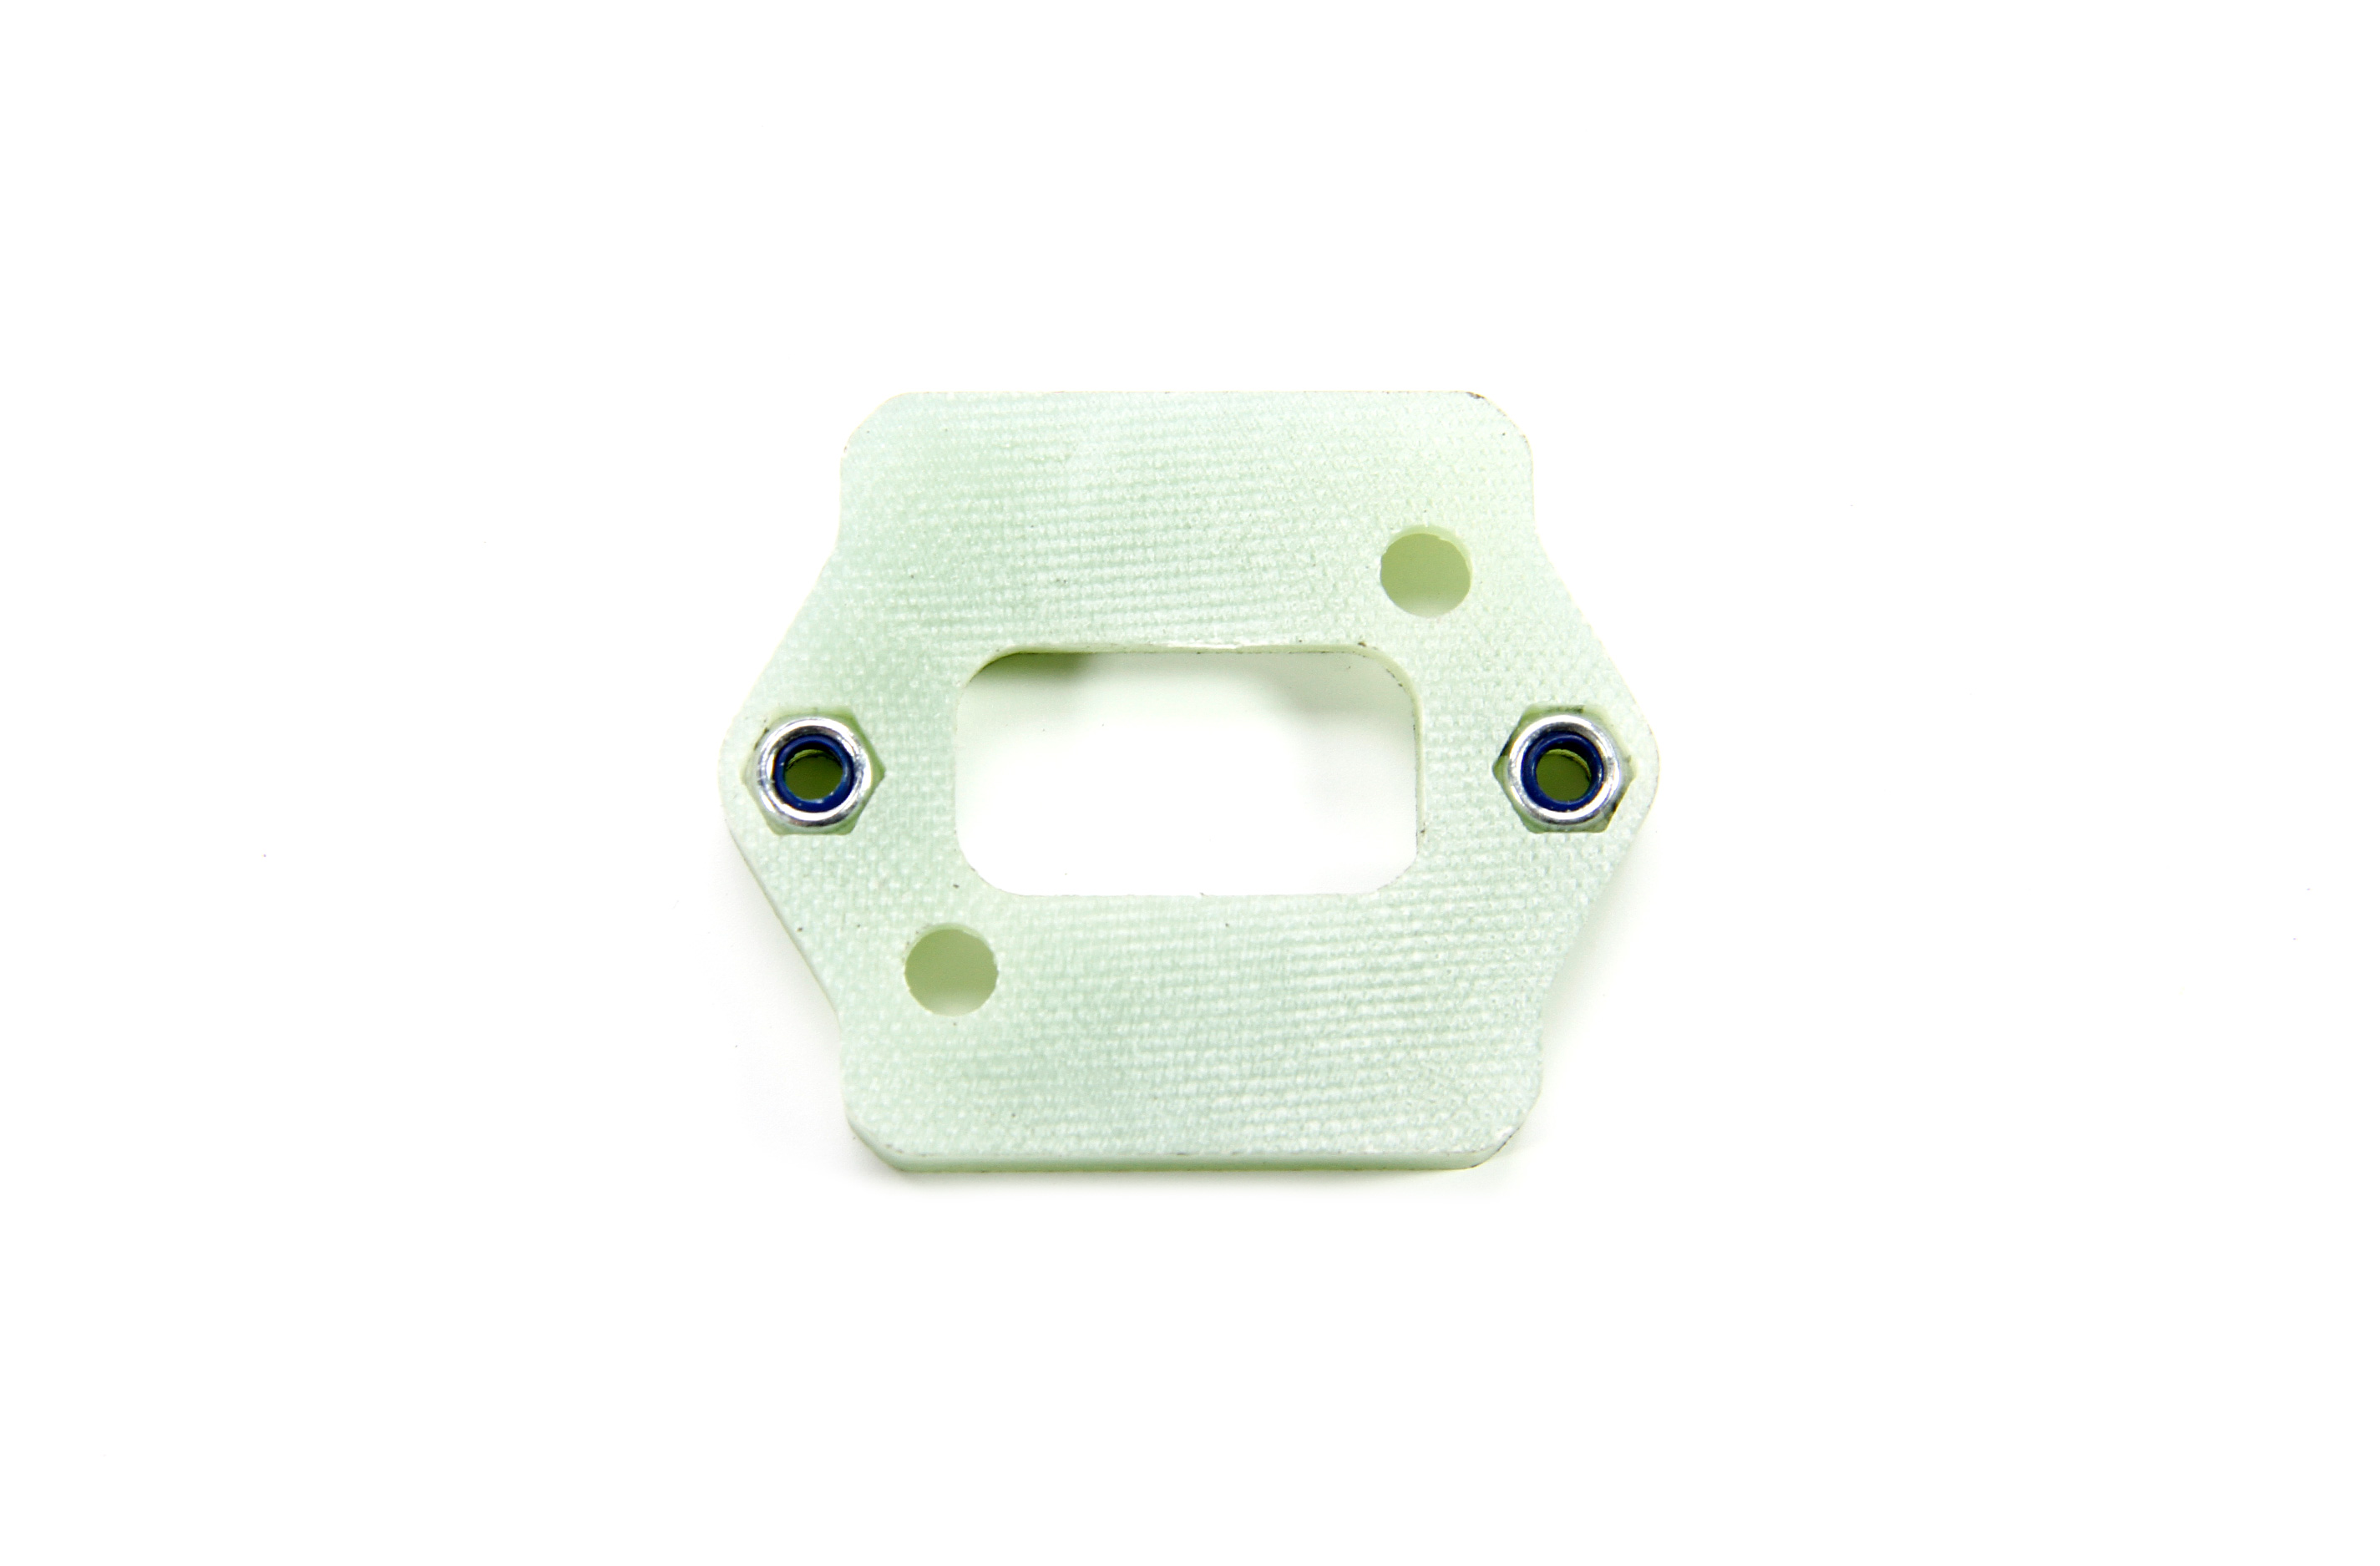 AREA-BJ035/05 Replace Epoxy plate for BJ035